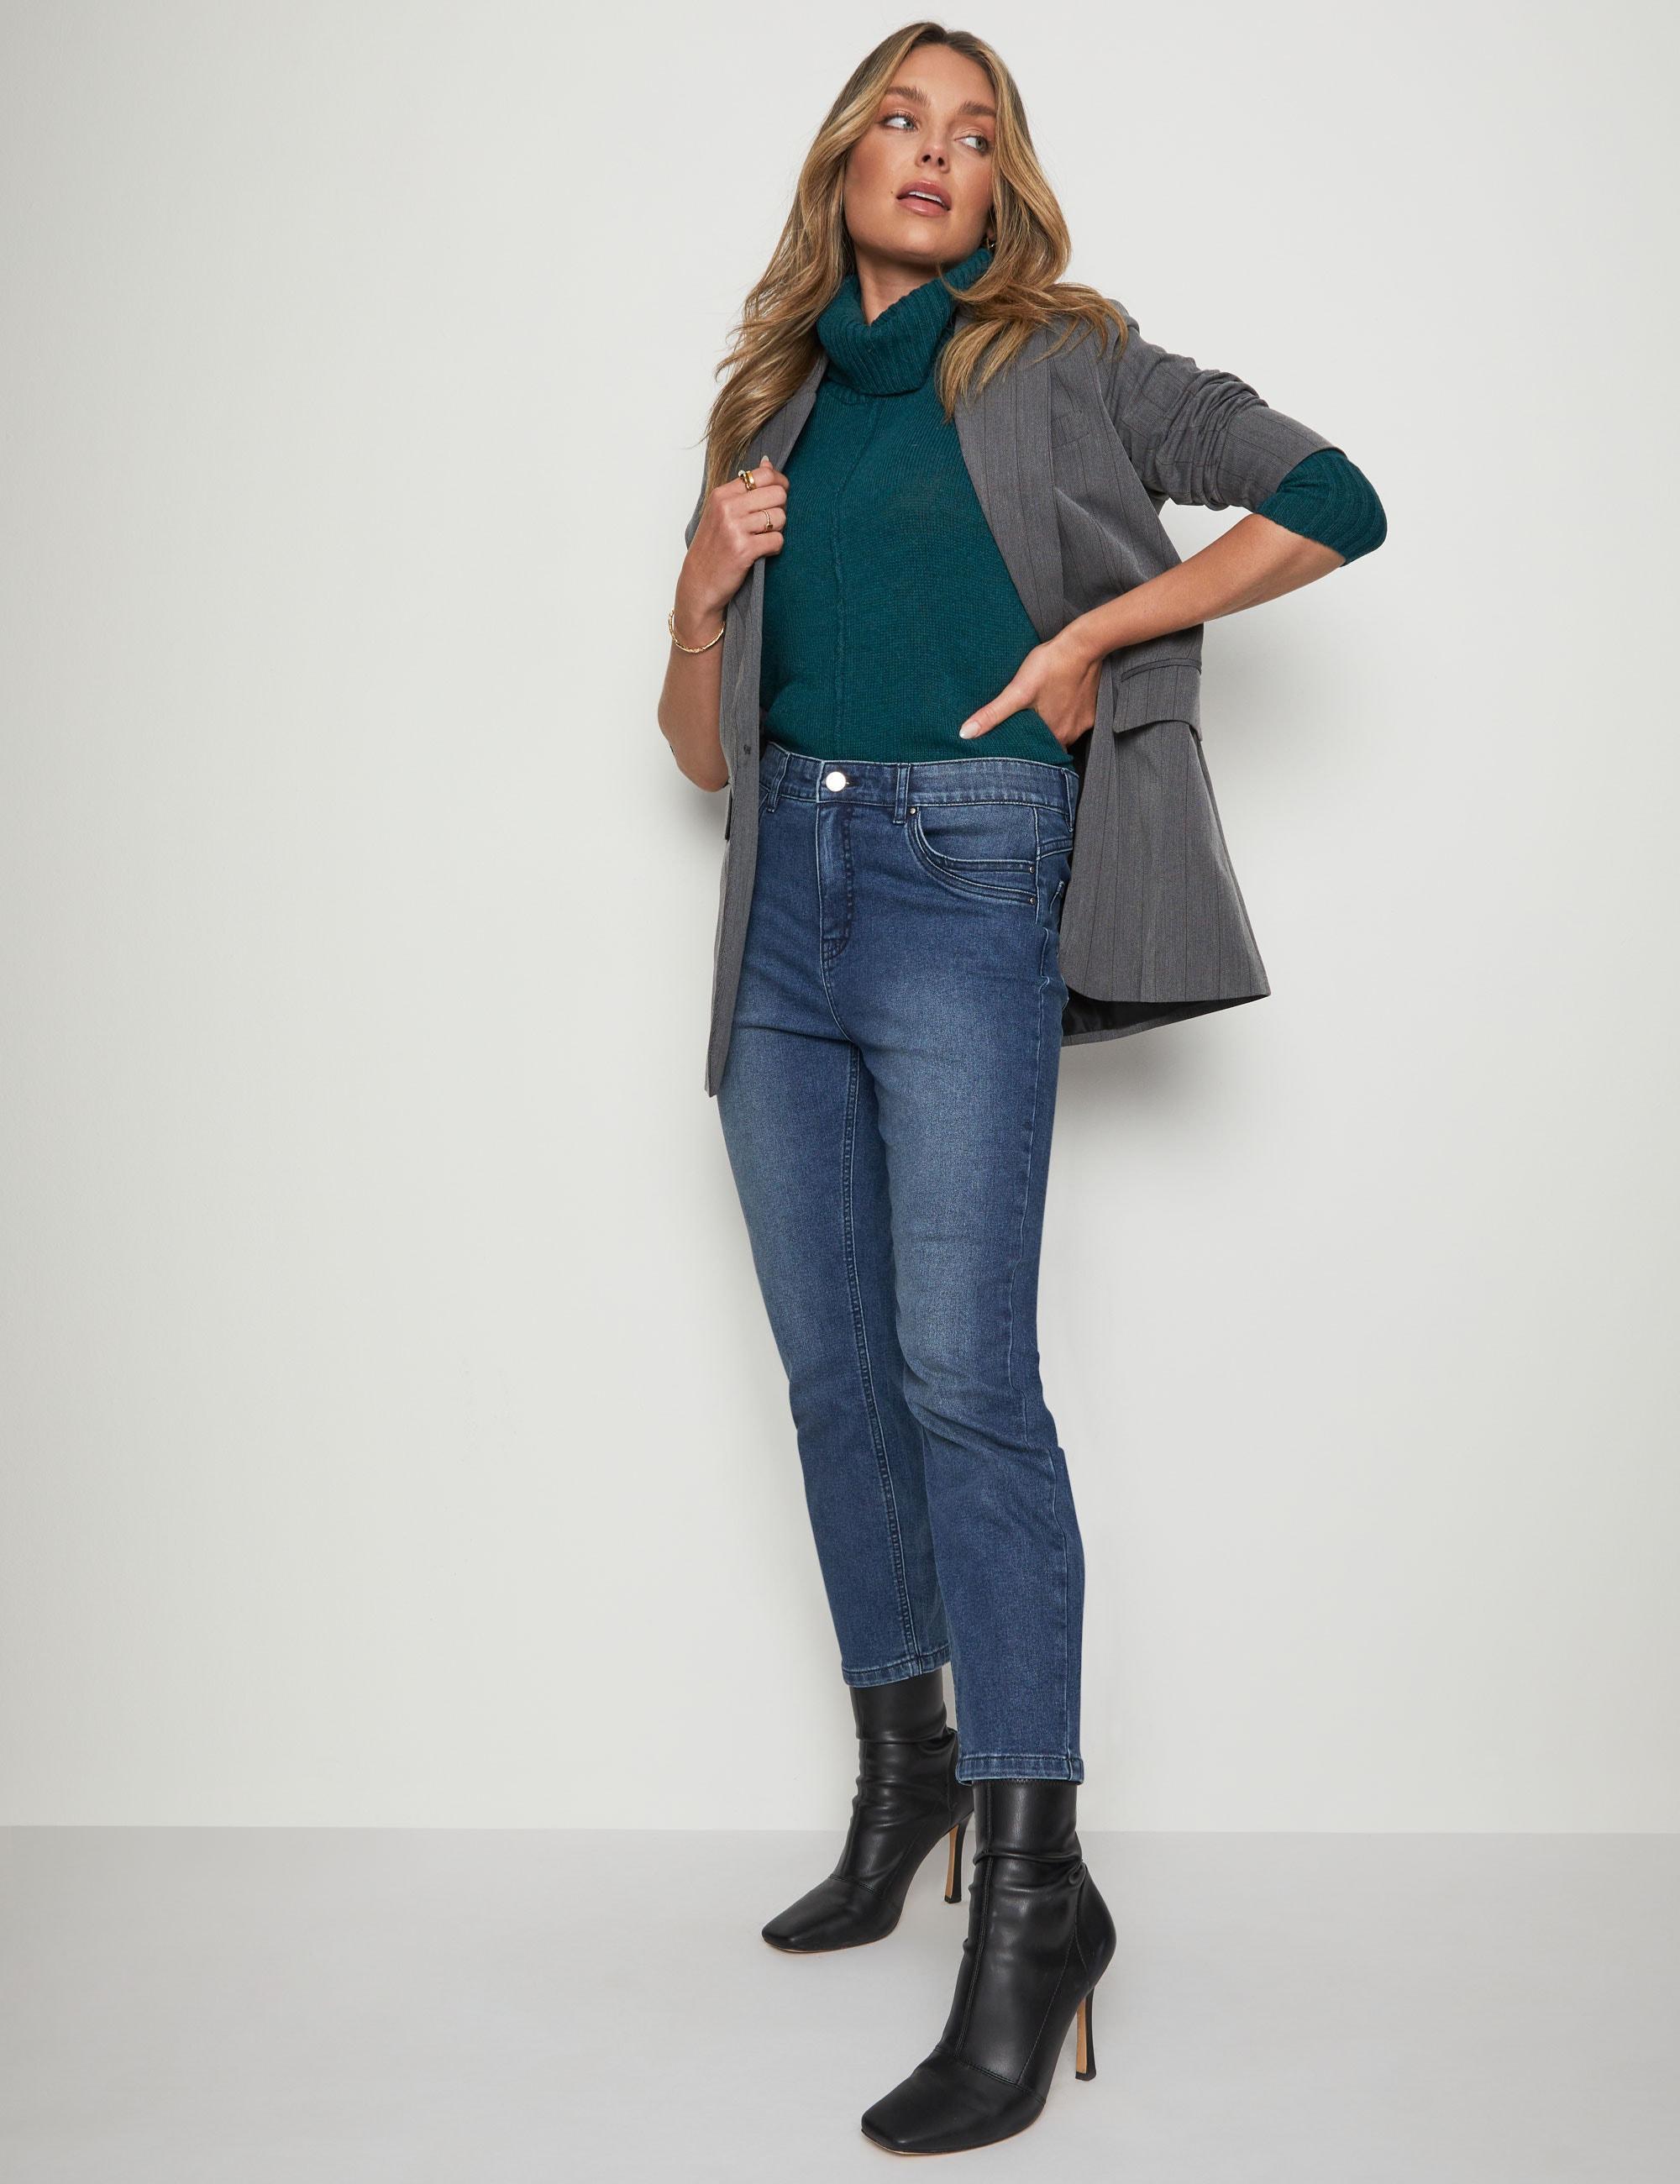 ROCKMANS - Womens Jeans - Blue Cropped - Solid Cotton Pants - Denim Work Clothes - Summer - Mid Wash - Elastane - Fashion Trousers - Office Wear